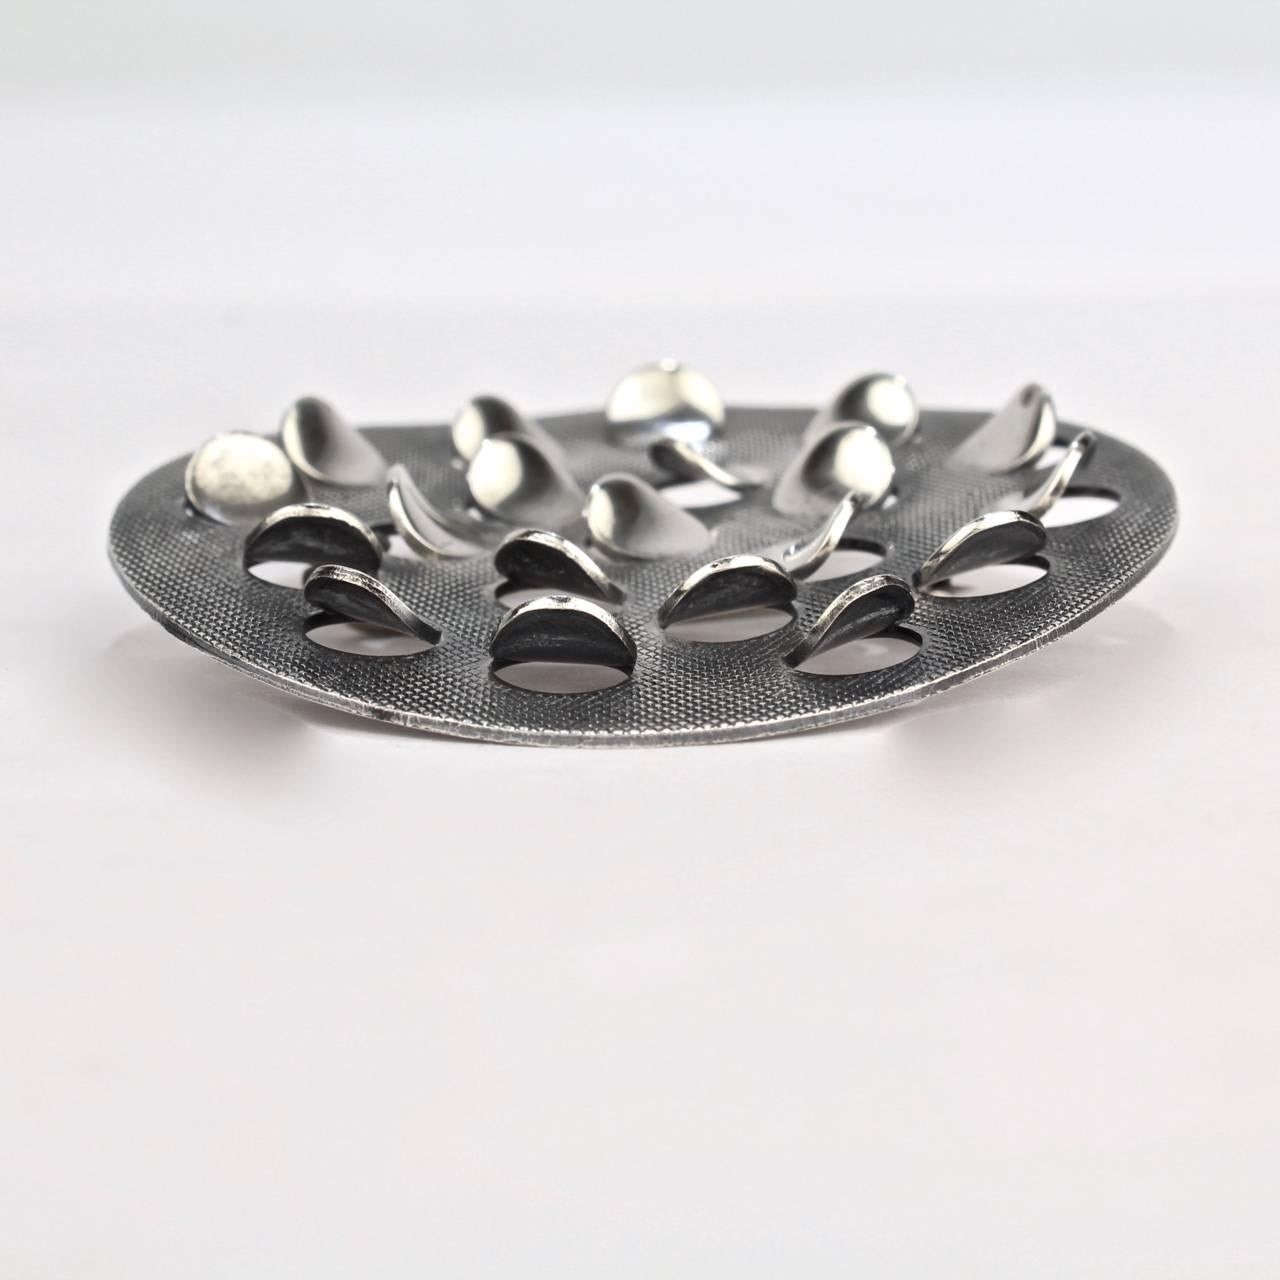 A modernist Norwegian sterling silver Scales or Punkter Pin by Grete Prytz Kittelsen for J. Tostrup.

Grete Prytz Kittelsen was a major figure in the Scandinavian Design Movement. Her goldsmithing and design works earned her acclaim, important